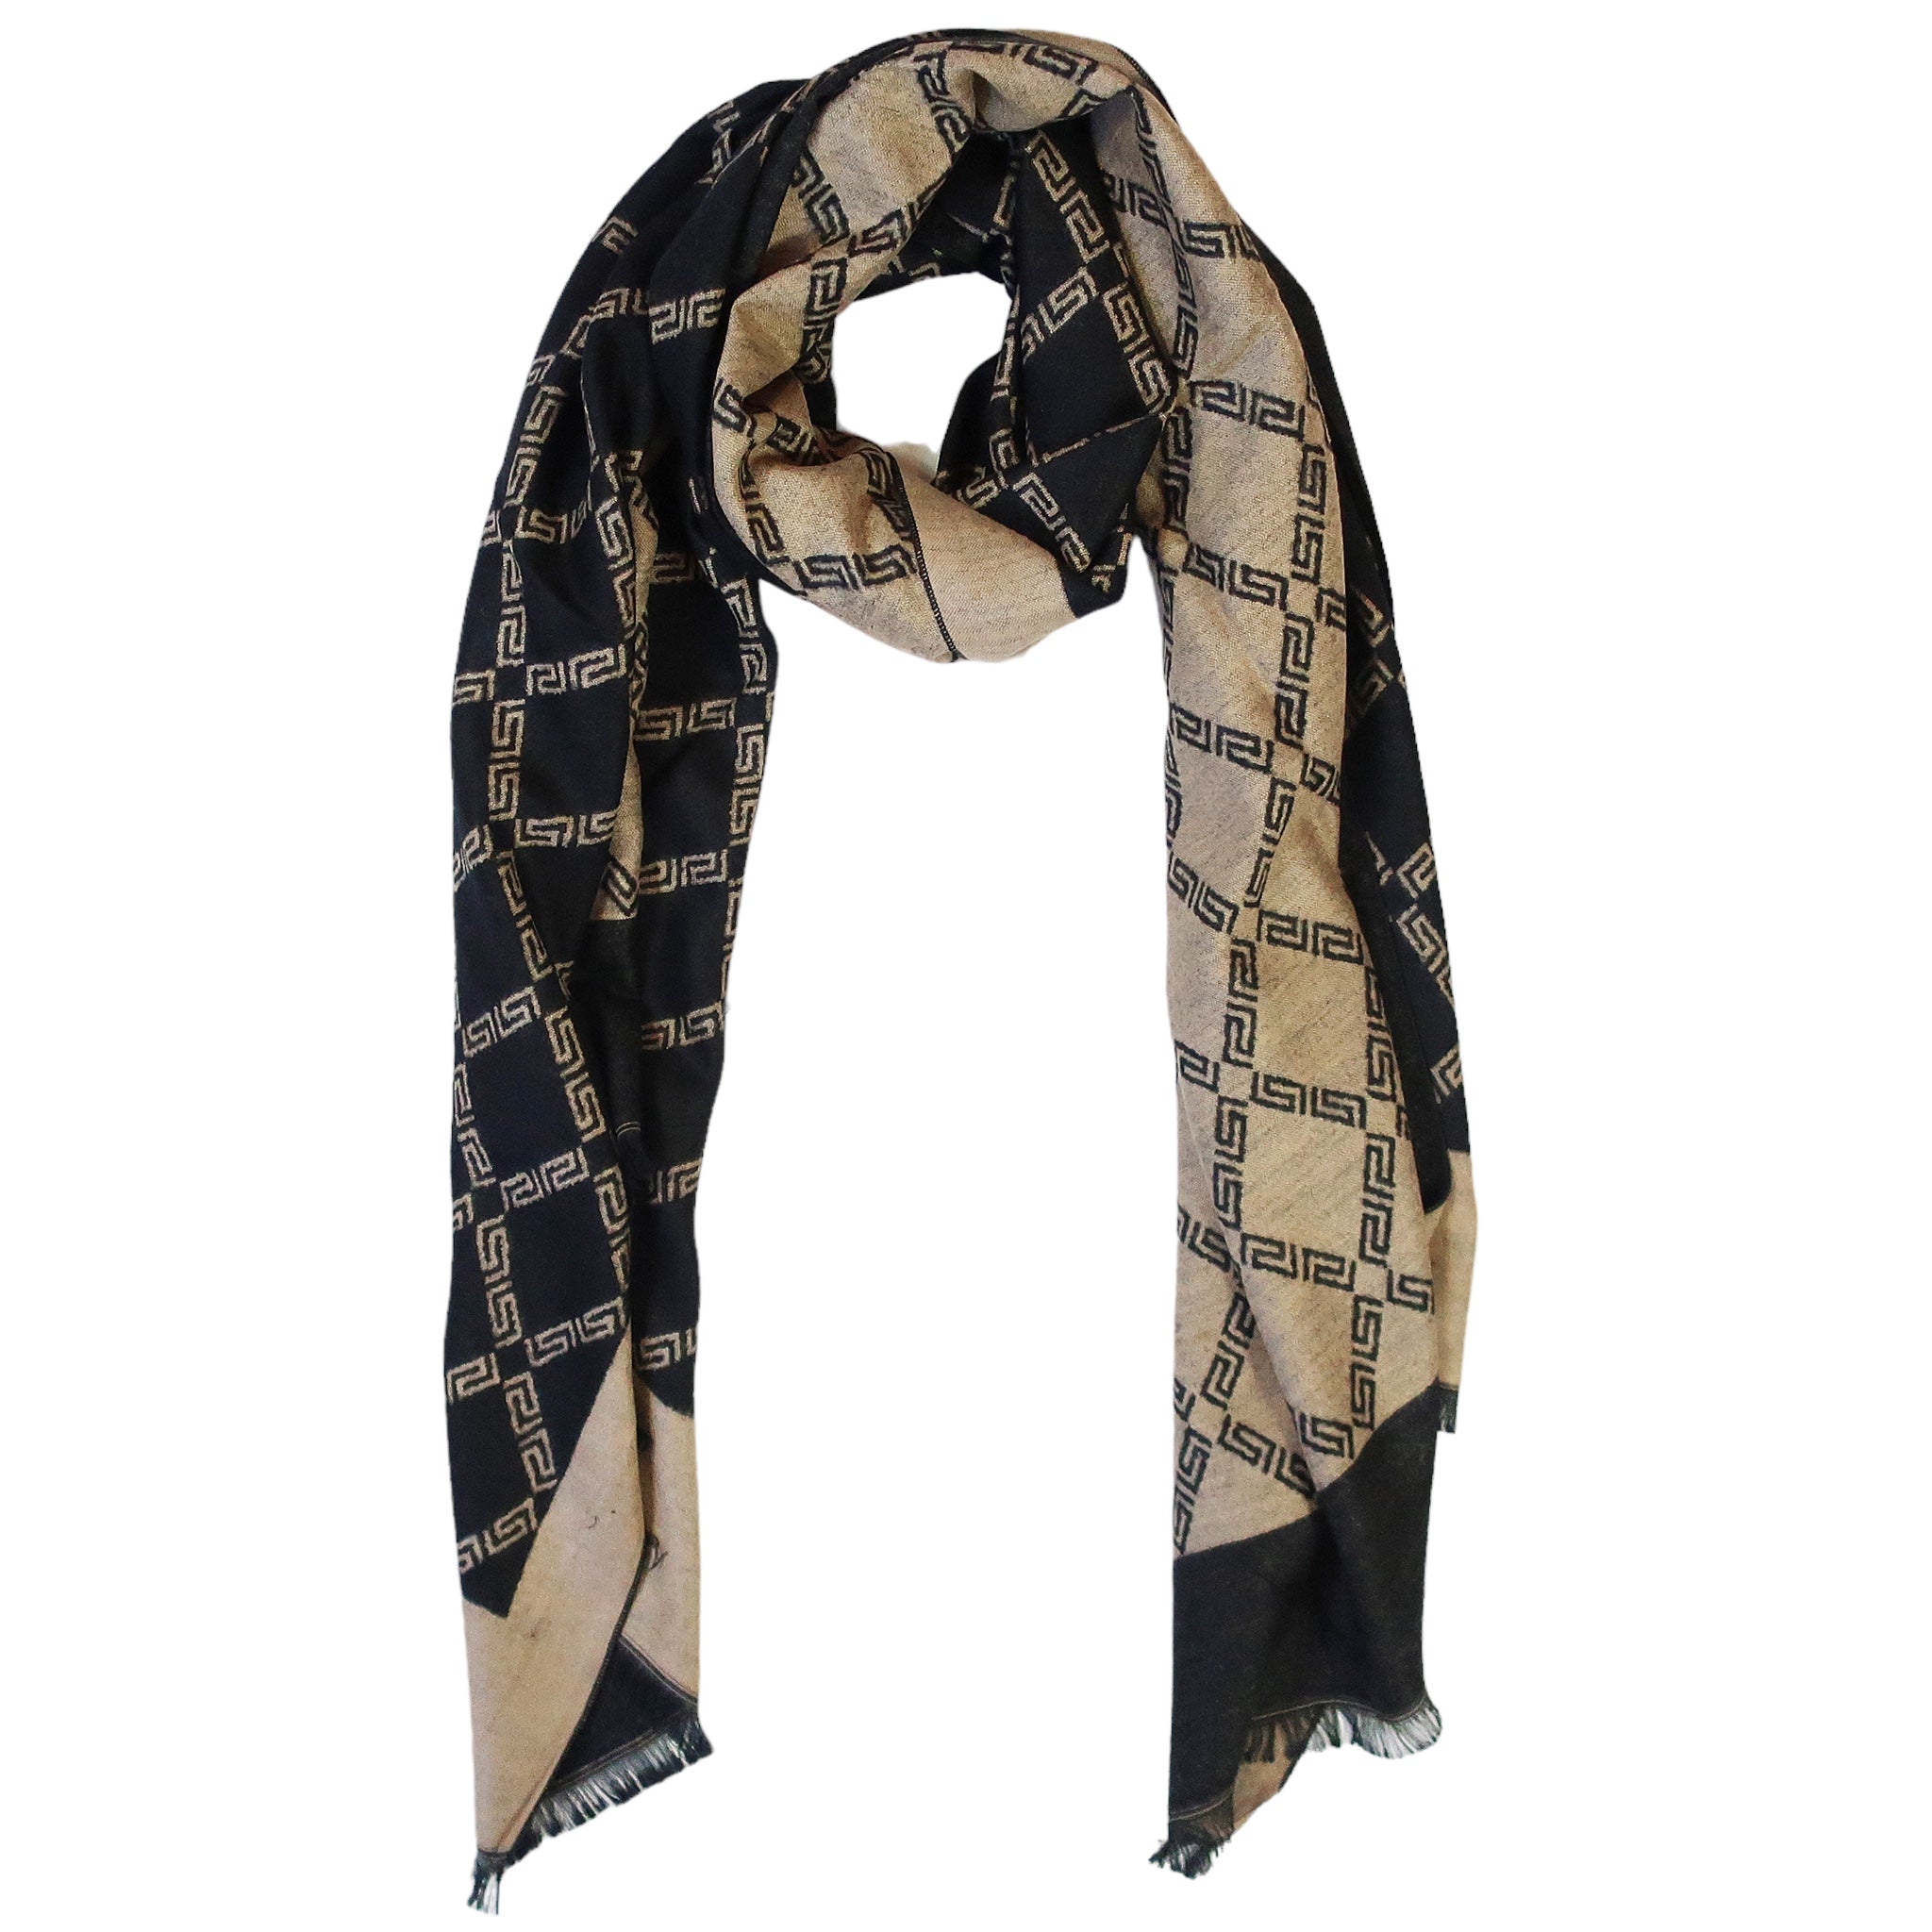 Blue Pacific Cashmere and Silk Vintage Chain Print Scarf in Black and Gold